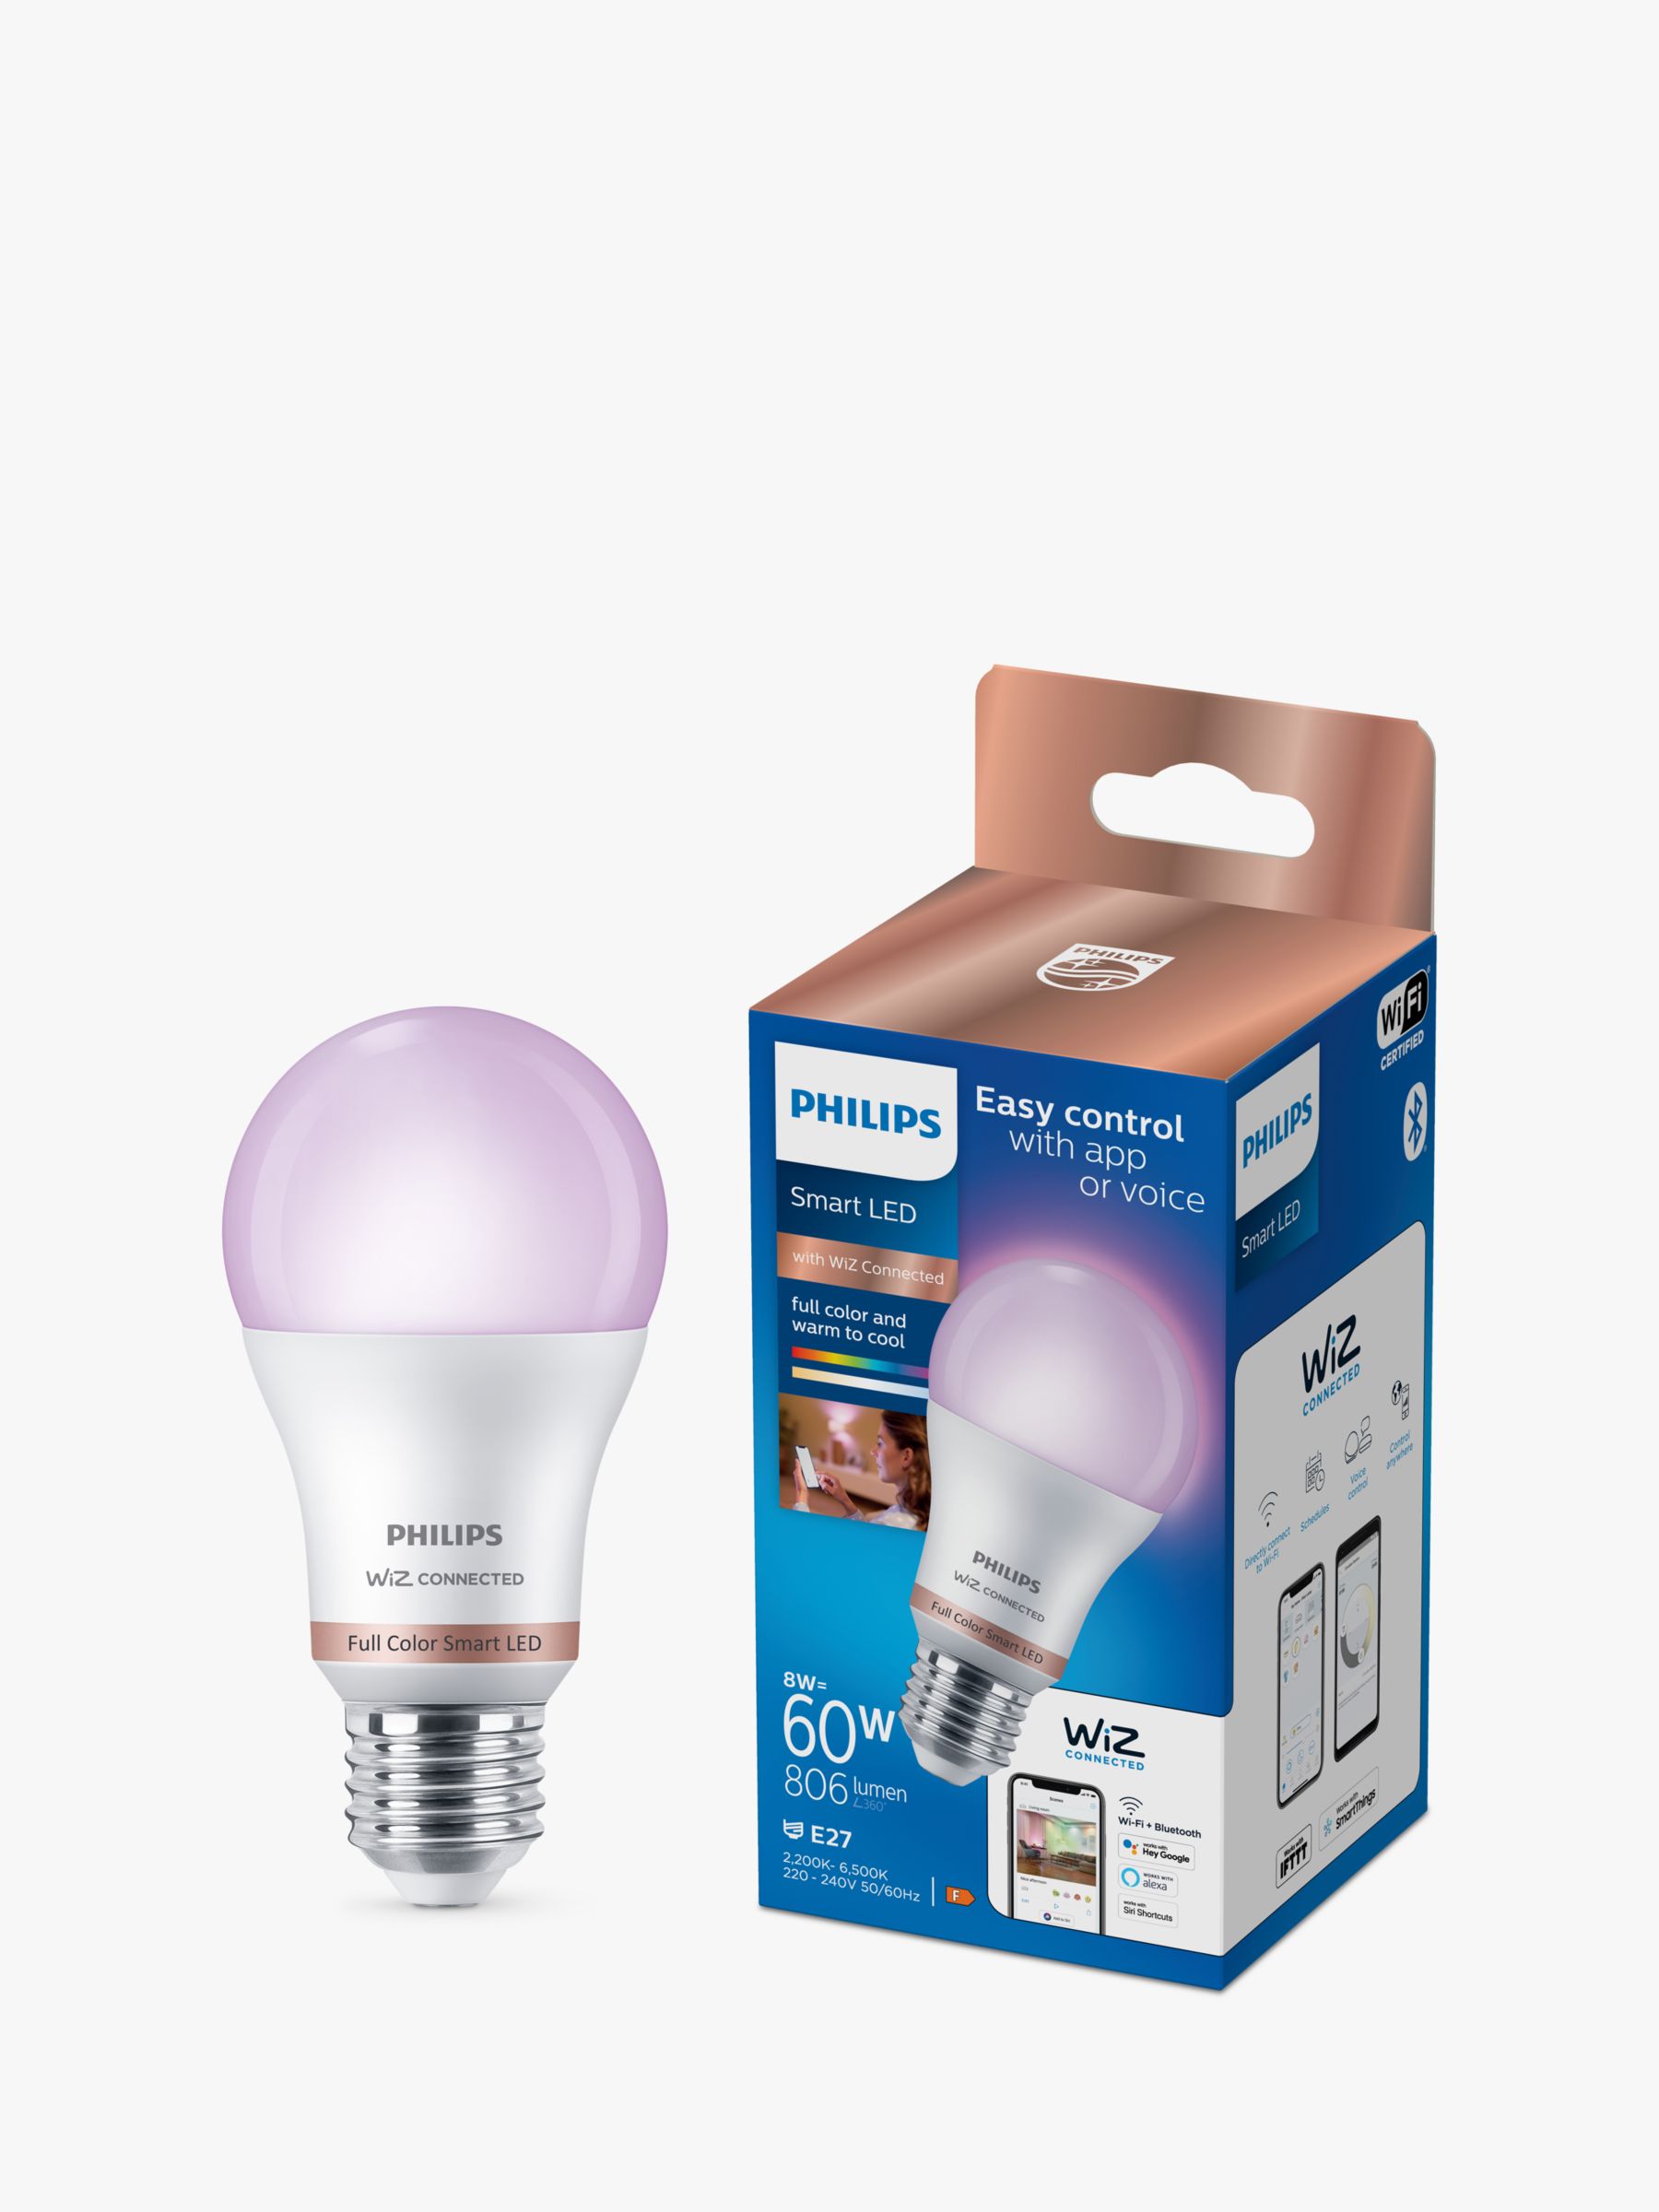 Photo of Philips smart led 8w e27 dimmable full colour and warm-to-cool classic bulb with wiz connected and bluetooth clear